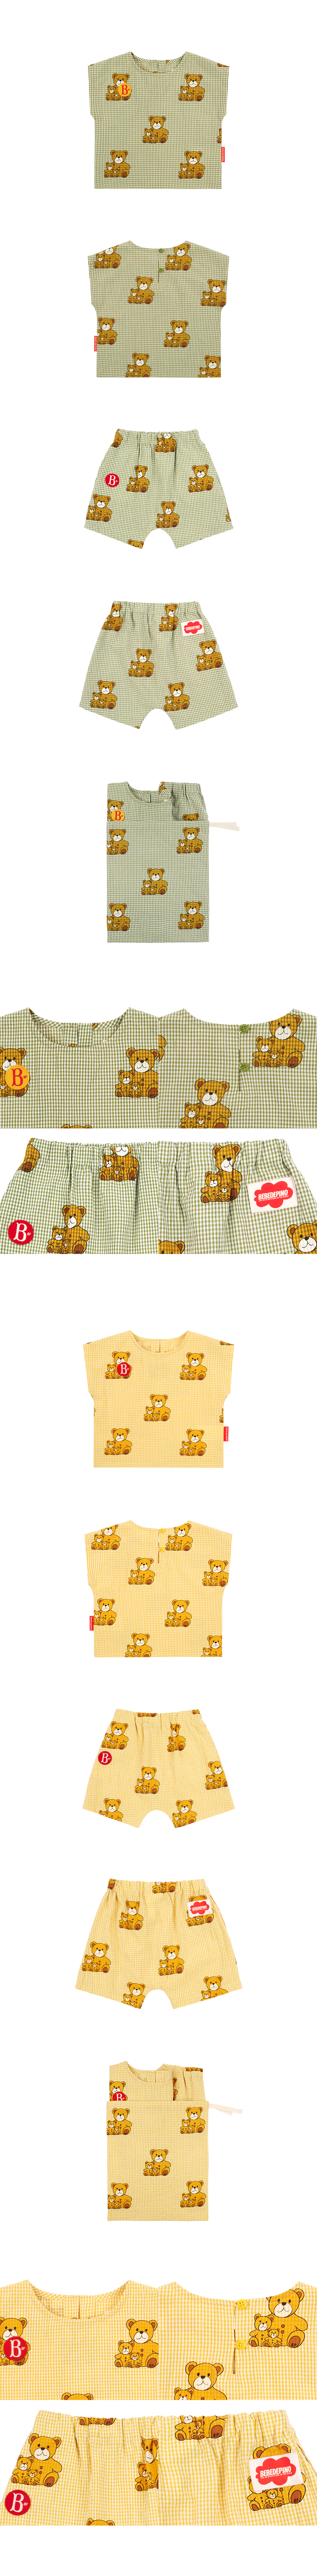 All over famille bear baby gingham check loungewear set 상세 이미지